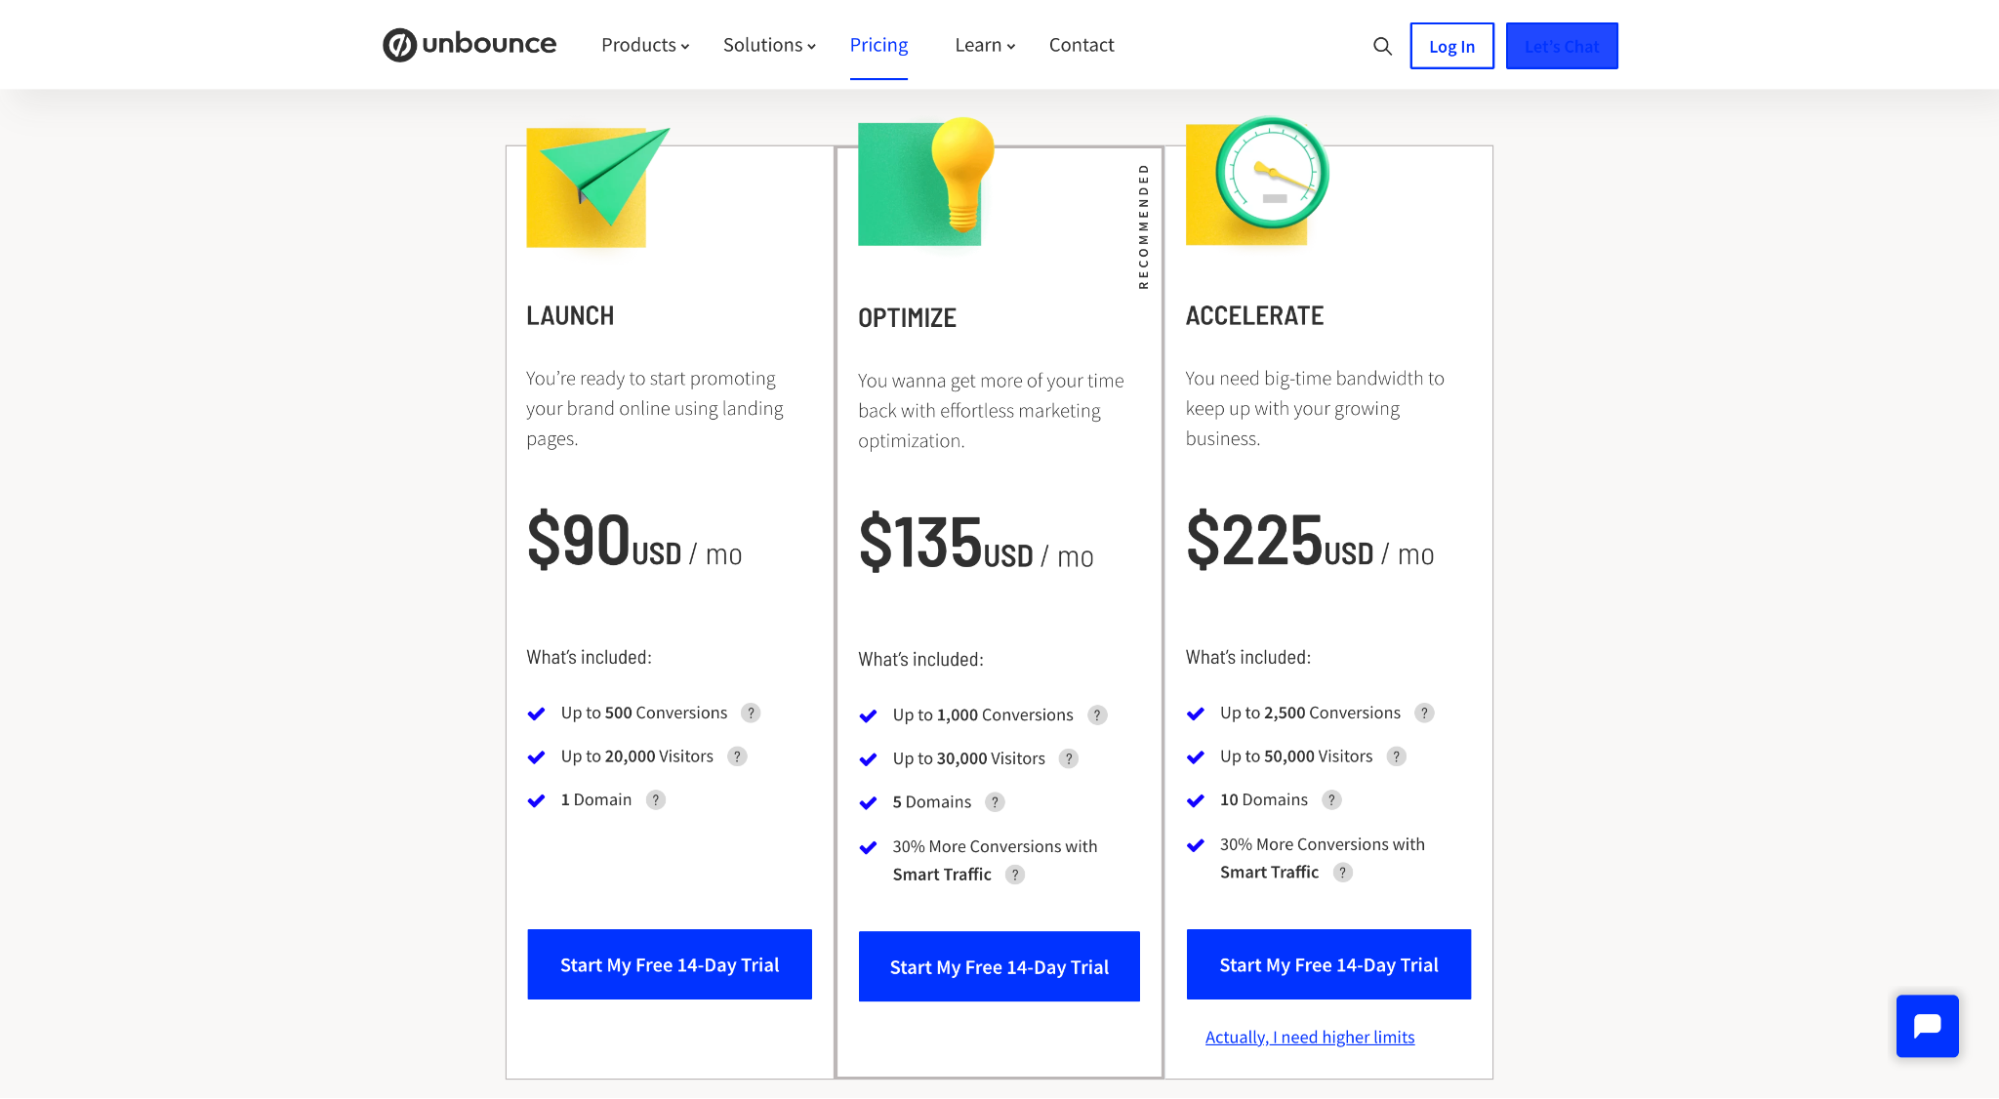 Unbounce pricing and plans page